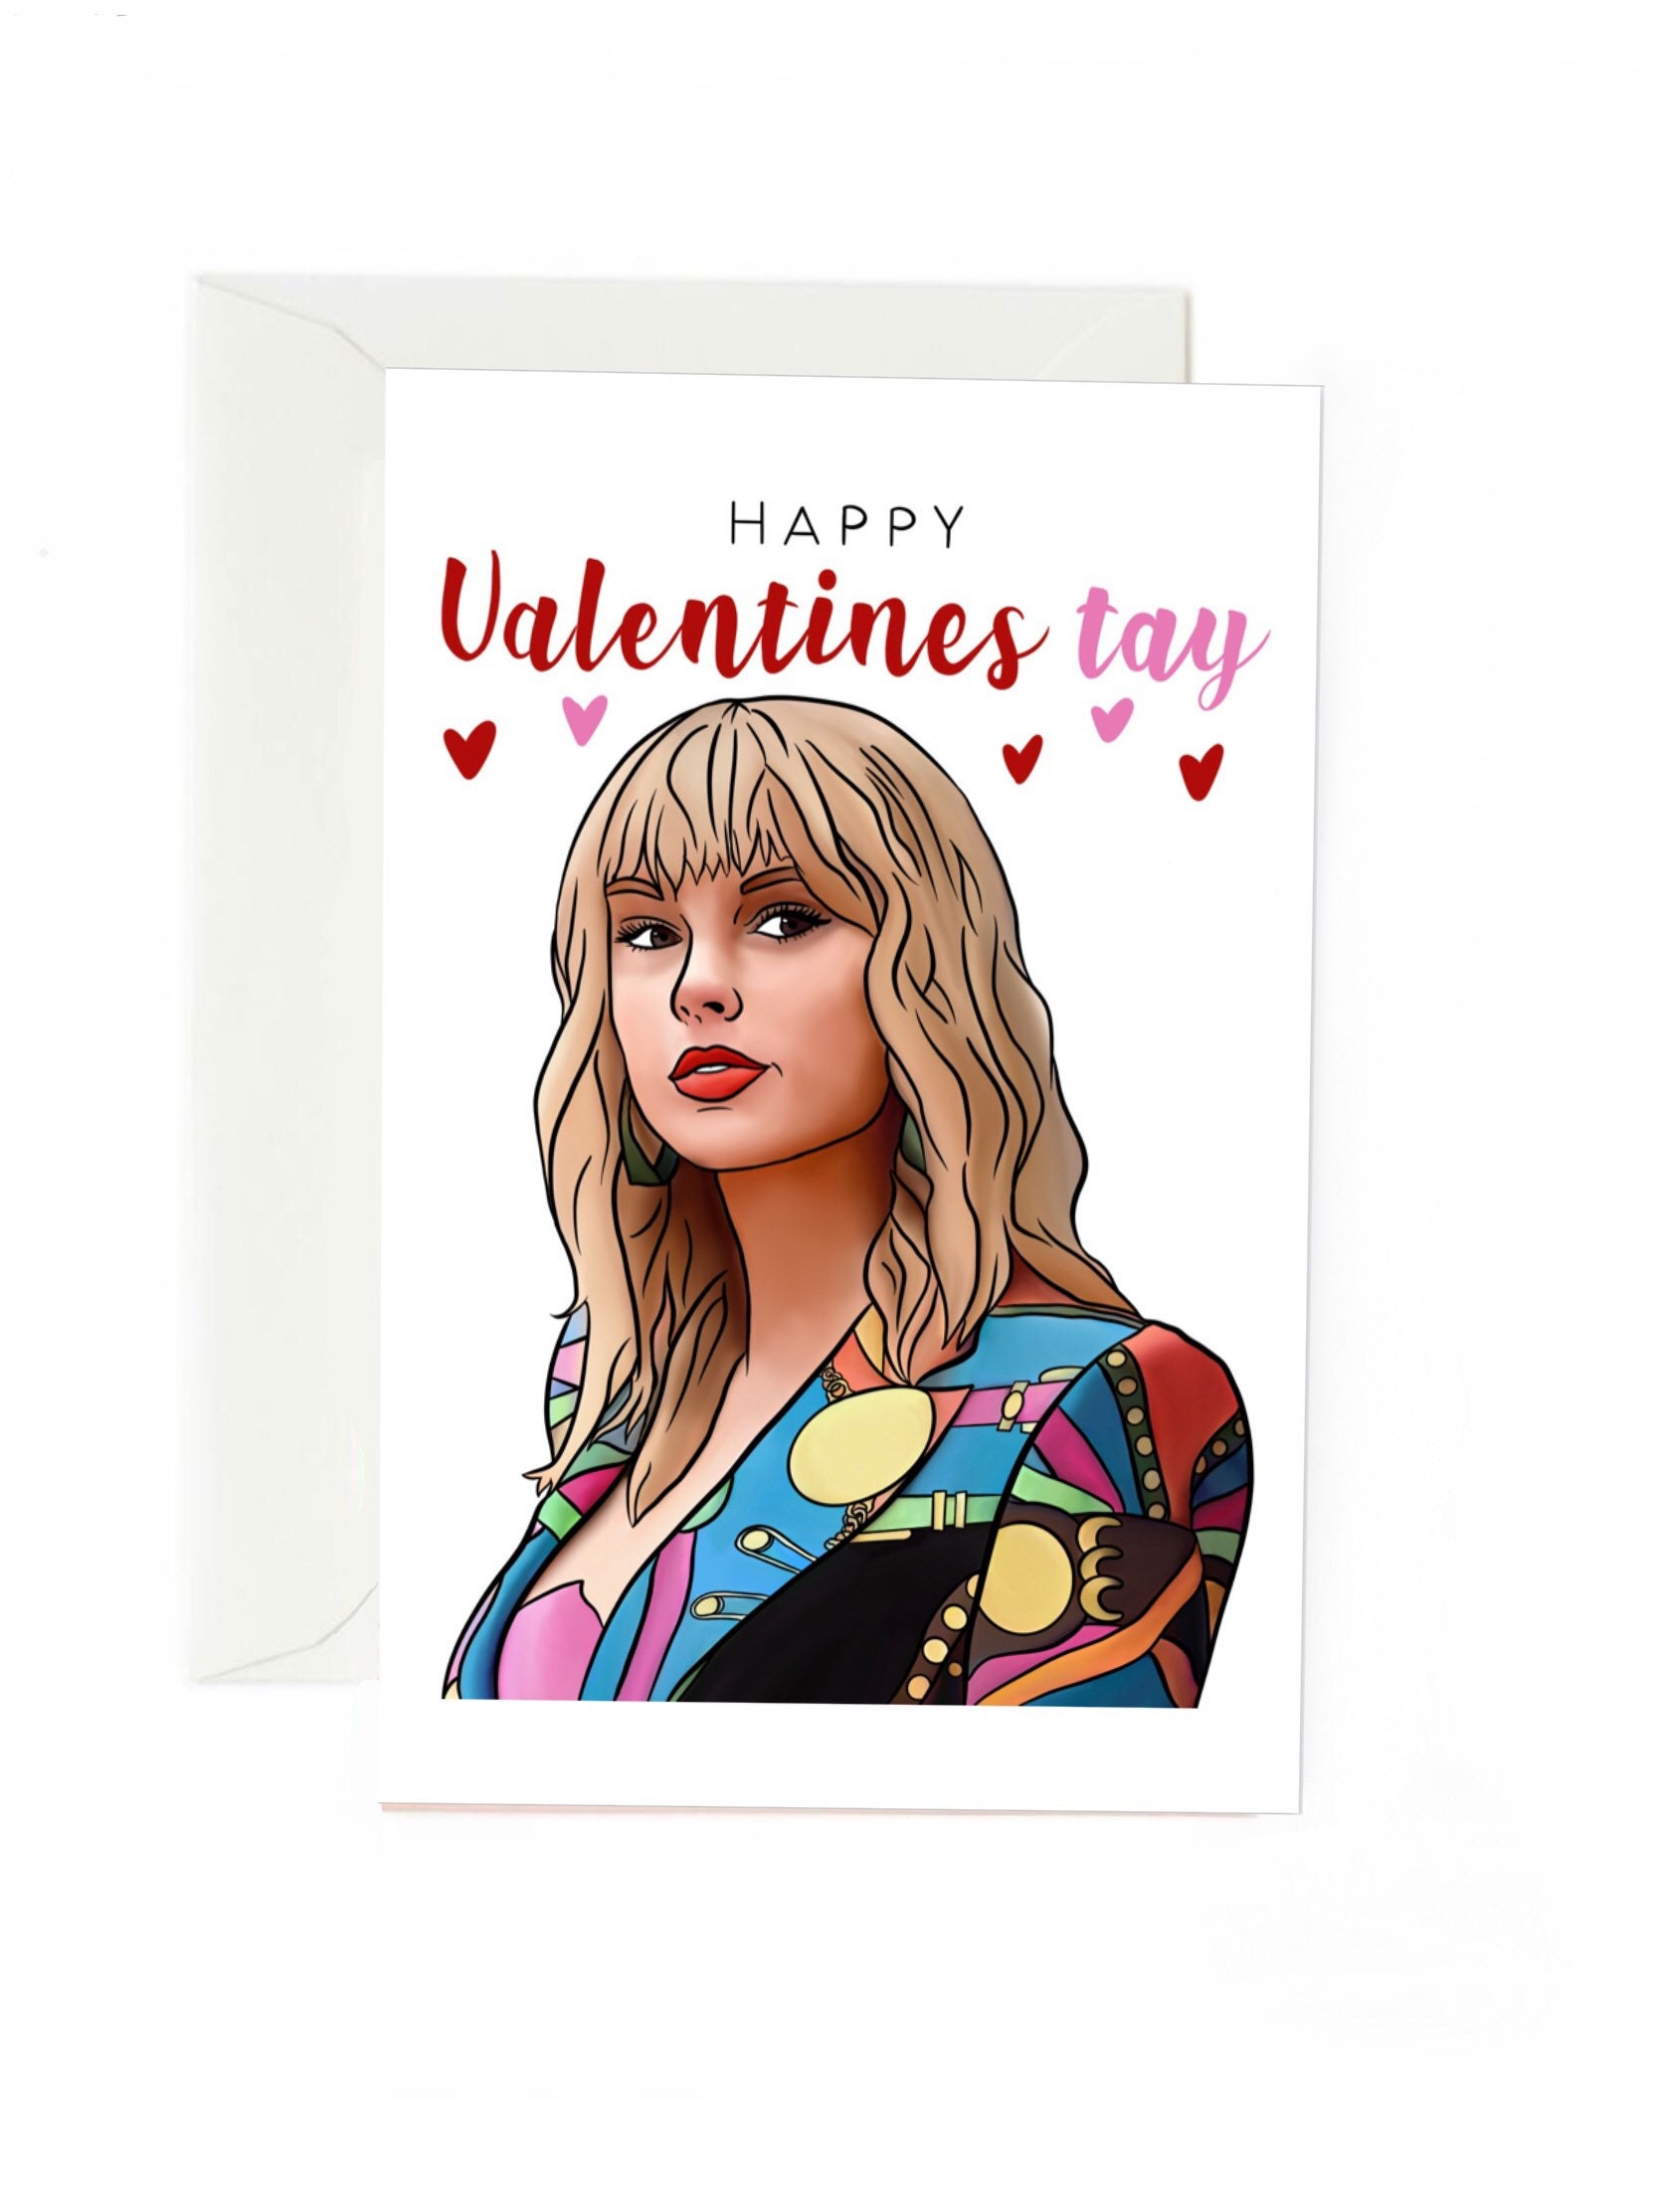 Taylor Swift Inspirational Quote Cards, Valentine's Day gift, Taylor Swift  Quotes, affirmation cards, mindfulness prints